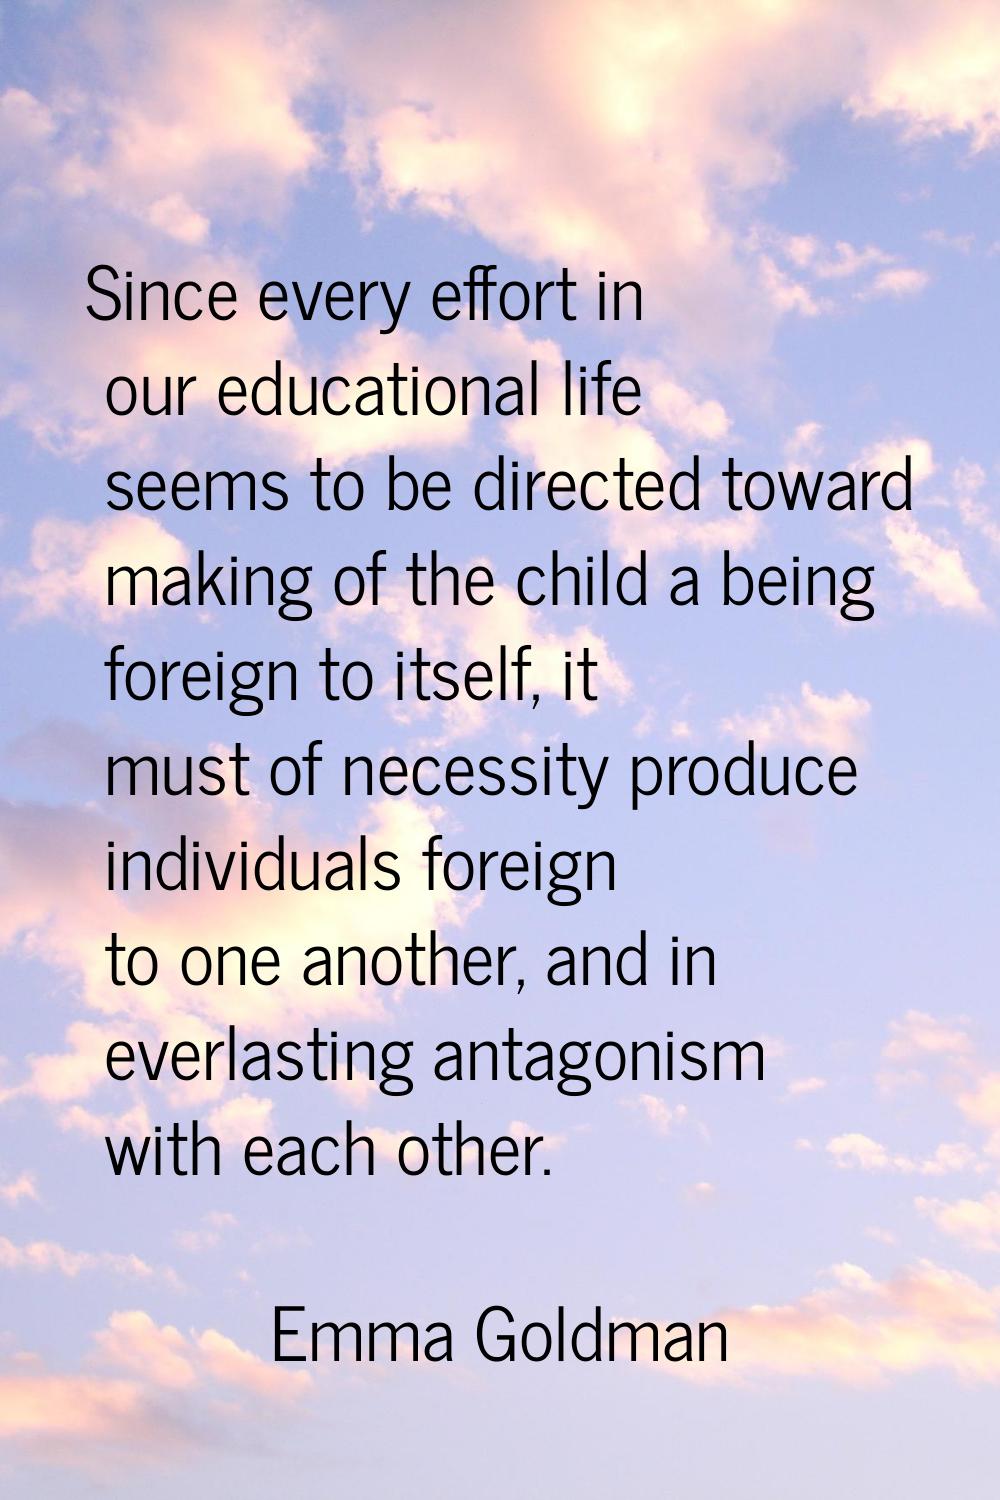 Since every effort in our educational life seems to be directed toward making of the child a being 